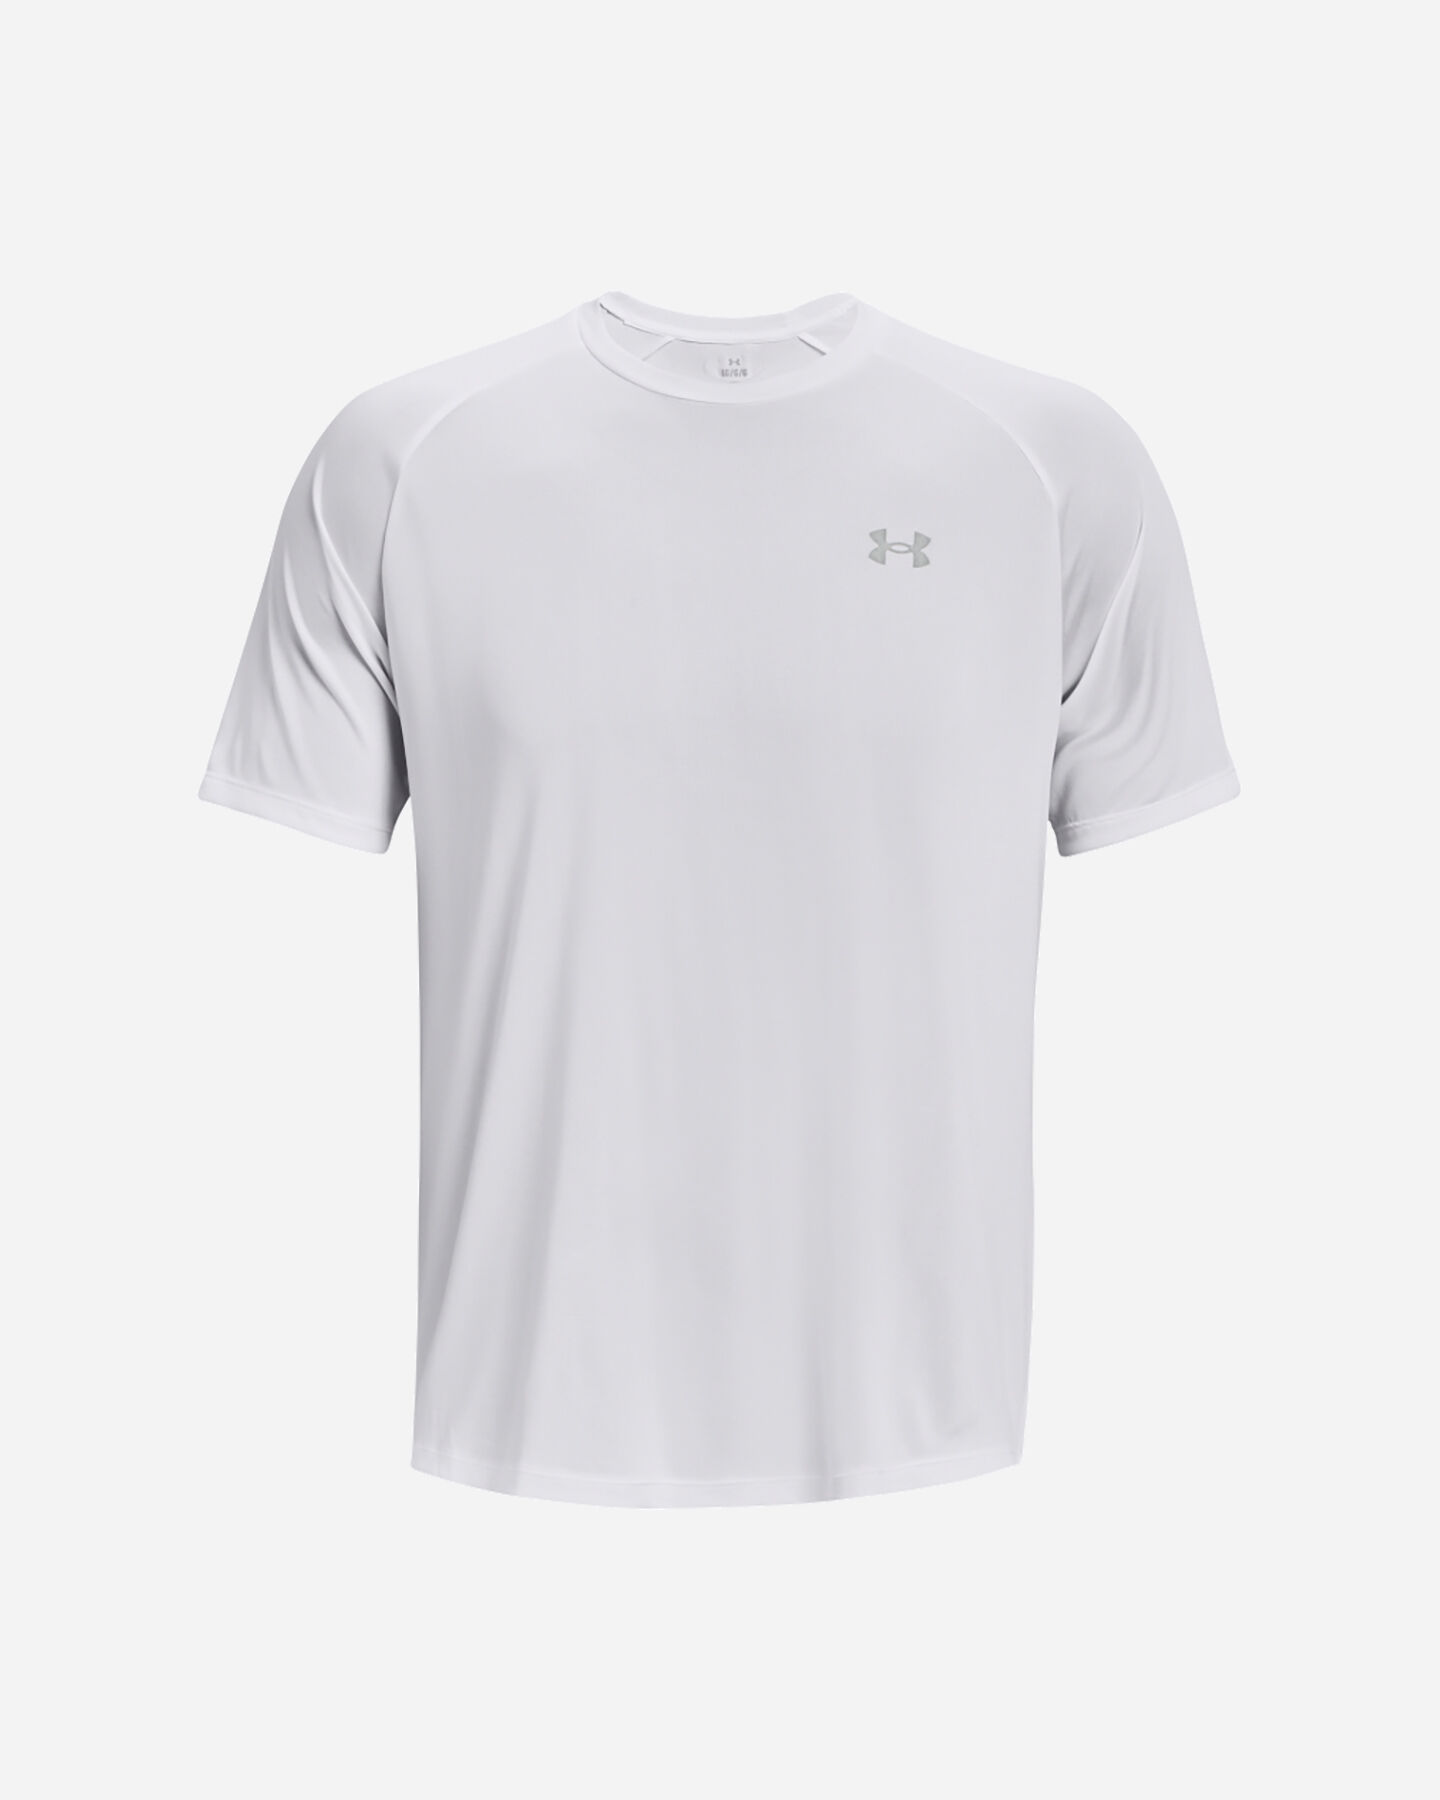  T-Shirt training UNDER ARMOUR TECH REFLECTIVE M S5528716|0100|SM scatto 0